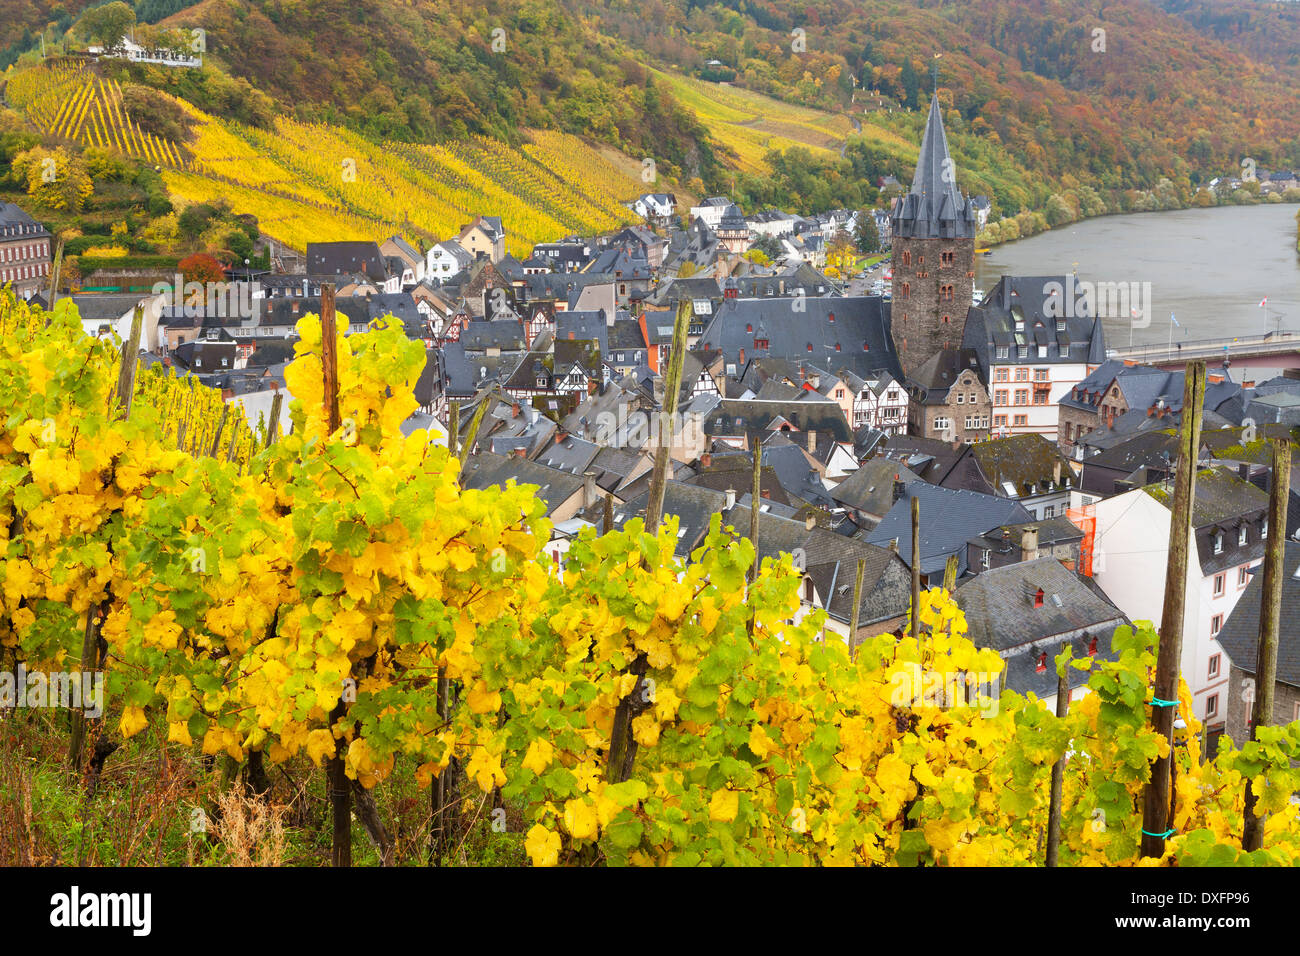 Overview of Bernkastel-Kues, Moseltal (Mosel River Valley), Germany Stock Photo